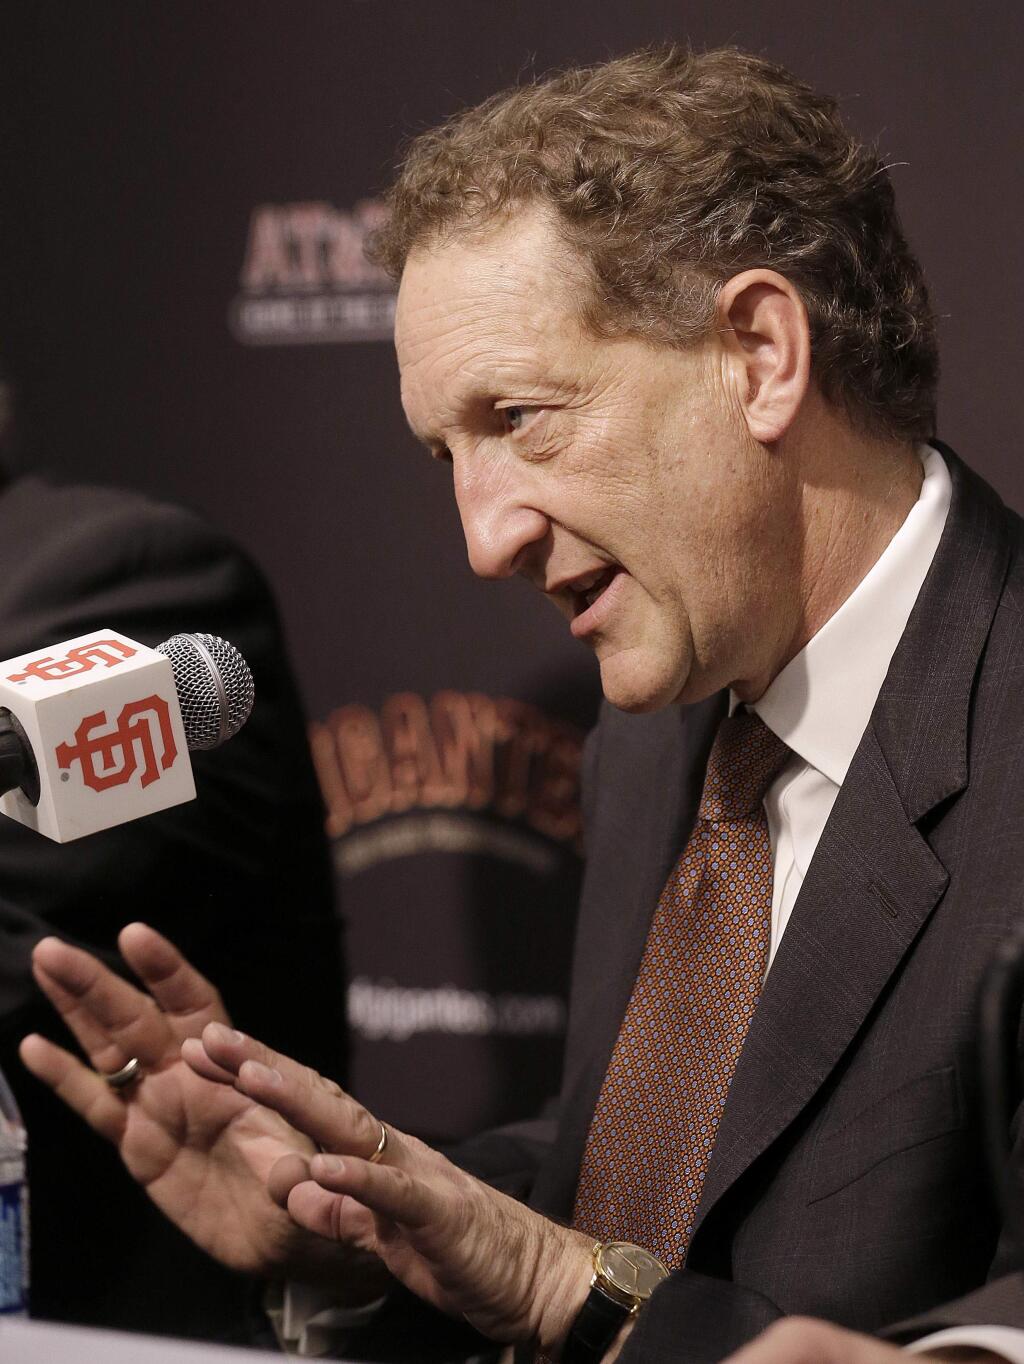 San Francisco Giants CEO Larry Baer speaks at a news conference in San Francisco, Tuesday, Oct. 3, 2017. (AP Photo/Jeff Chiu)